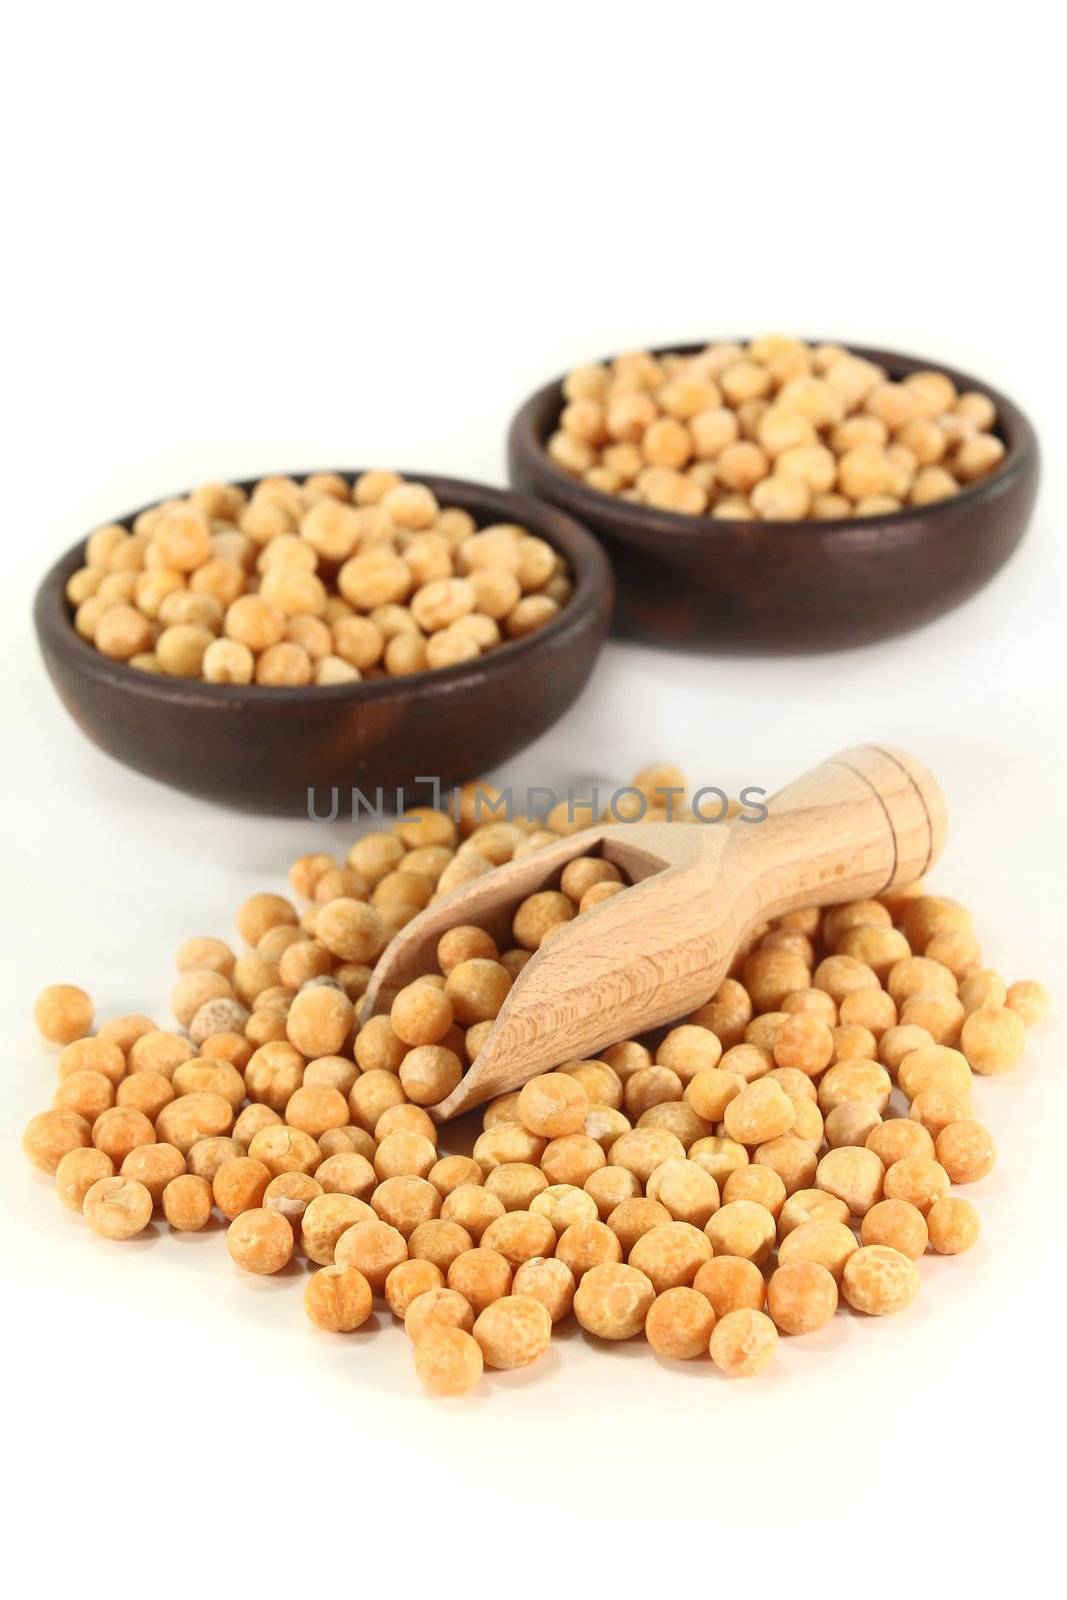 yellow peas and a shovel on a white background